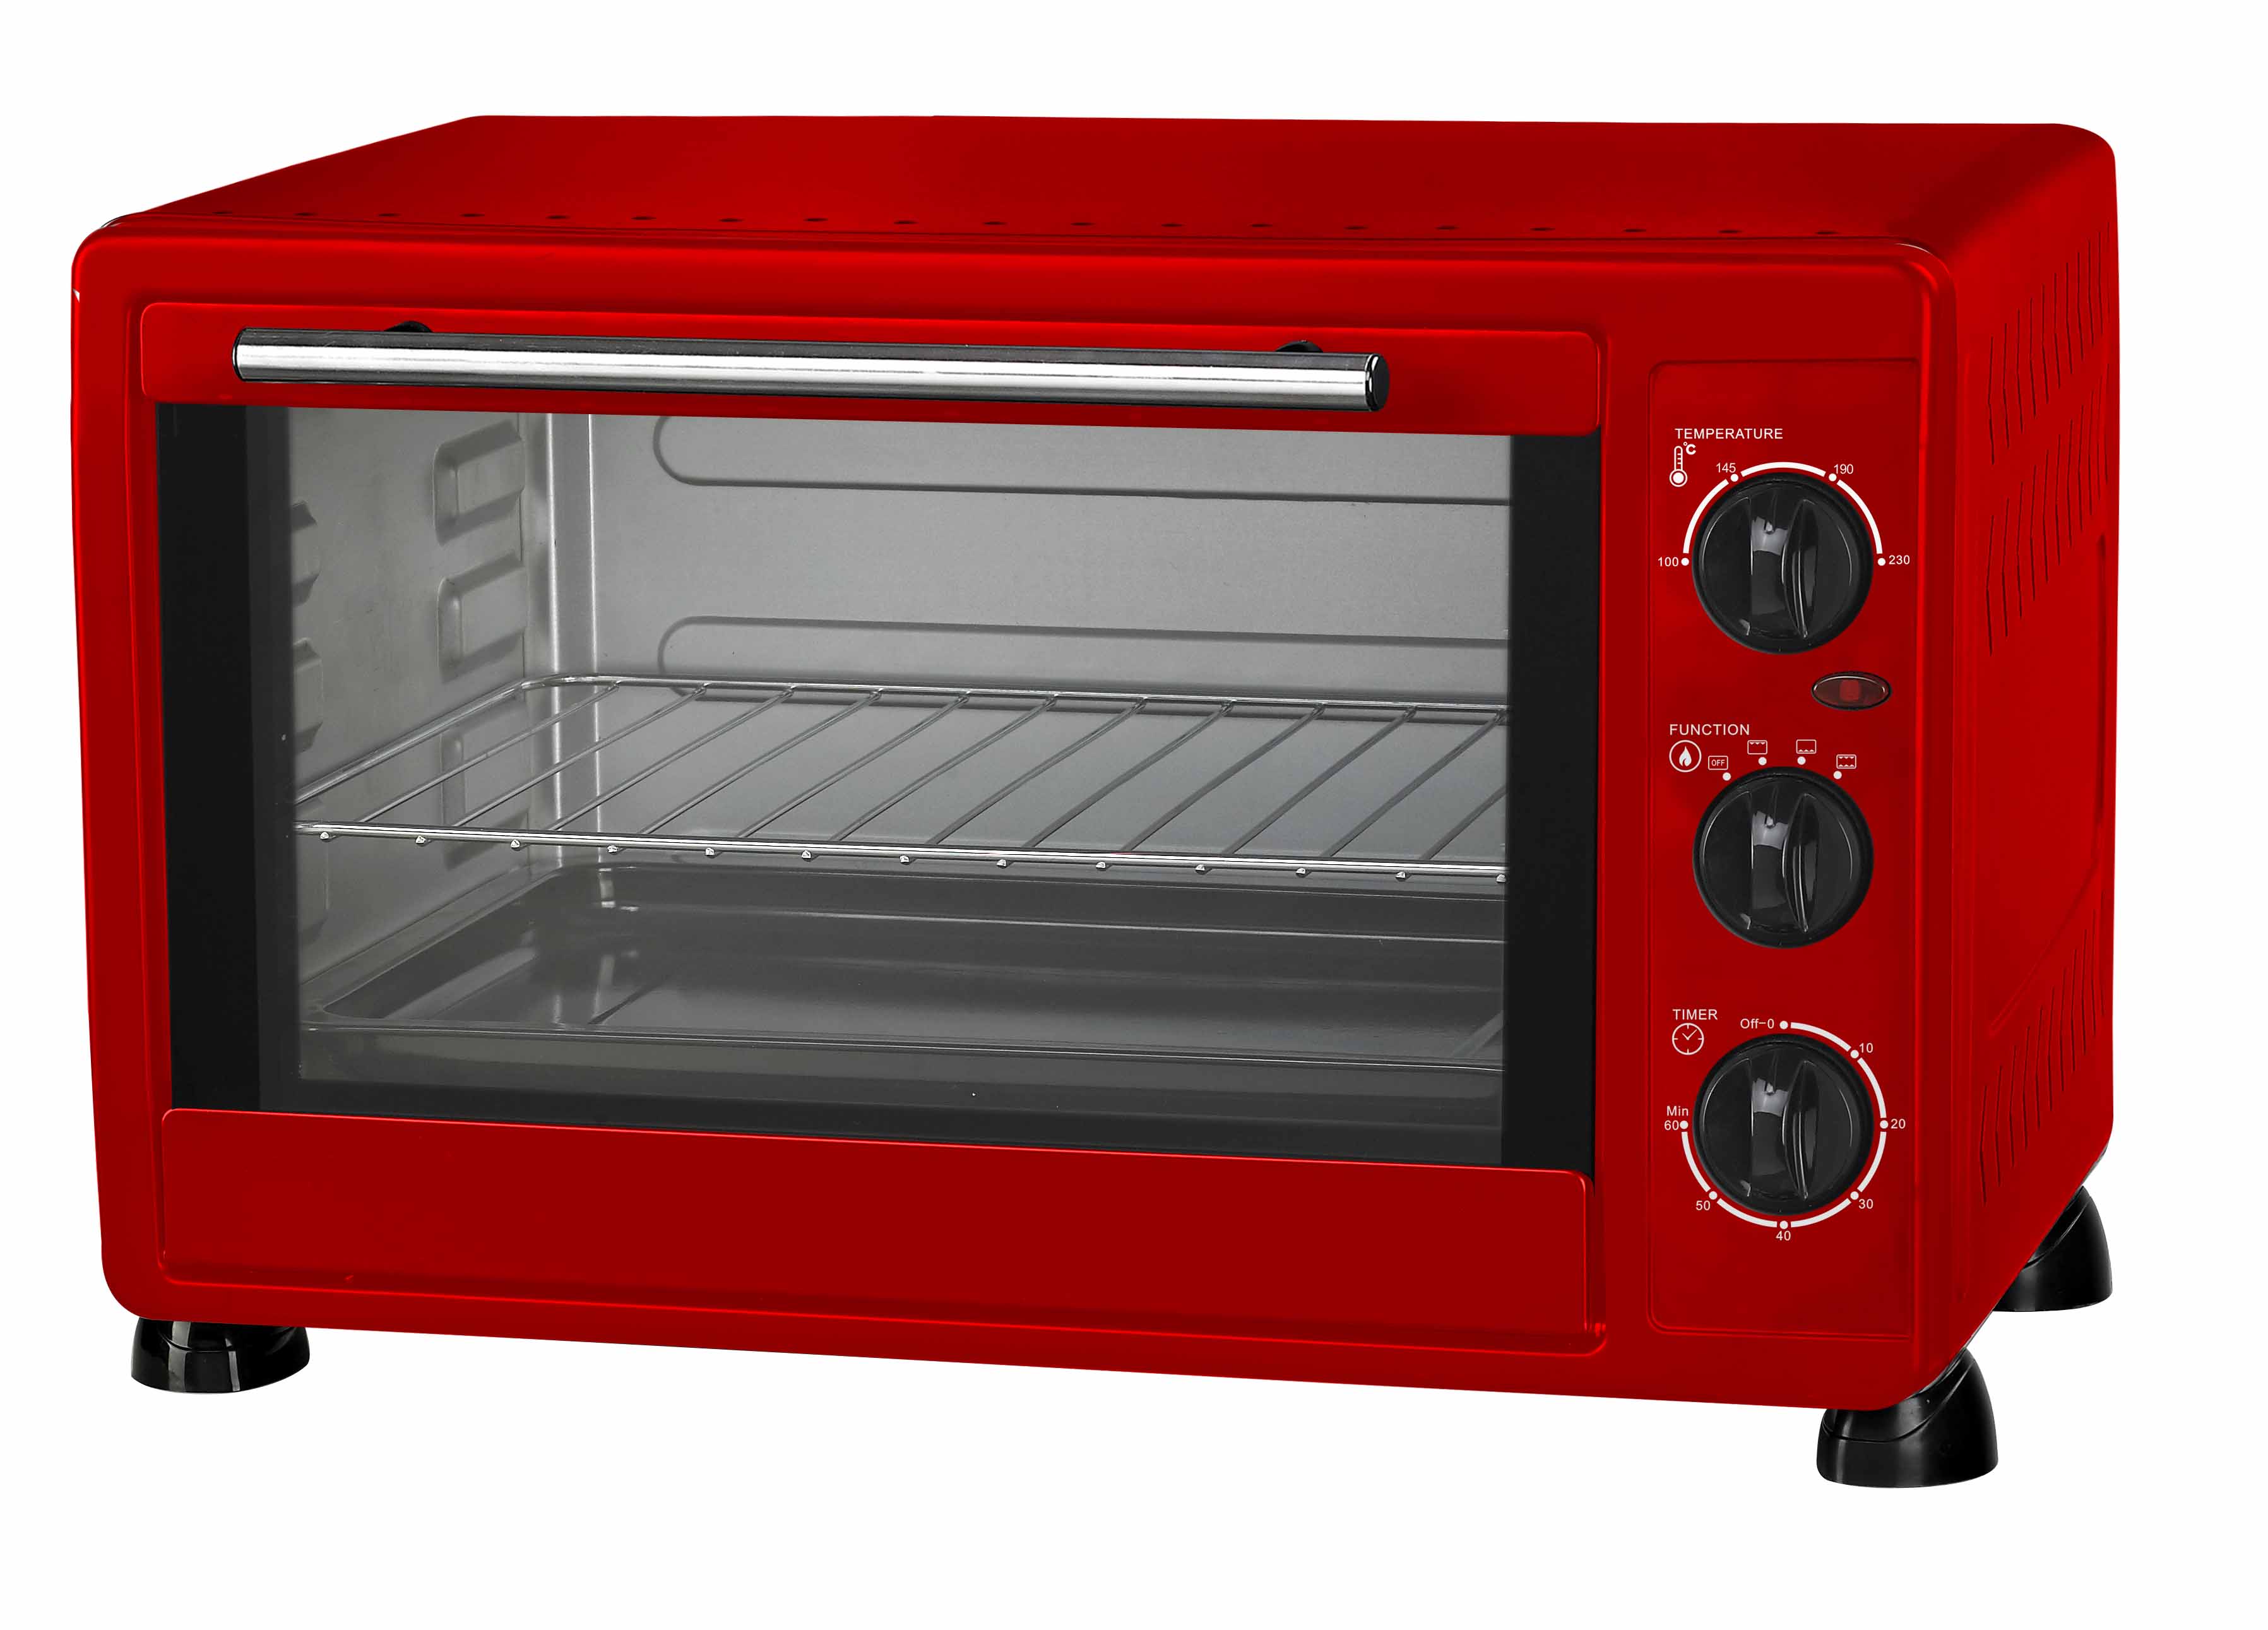 30L Electrical oven with Rotisserie & Convection function